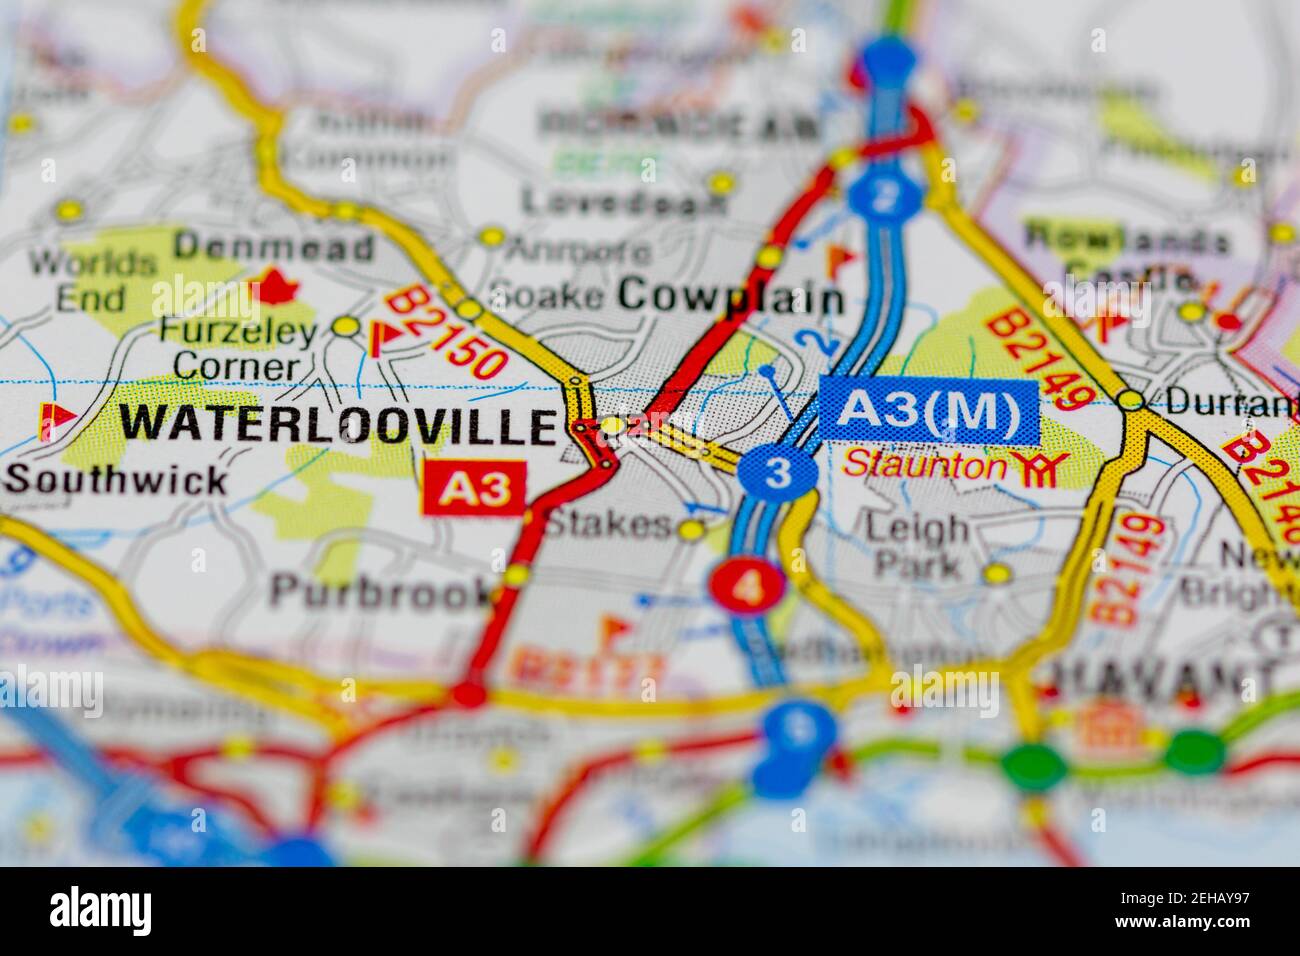 Waterlooville and surrounding areas shown on a road map or Geography map Stock Photo